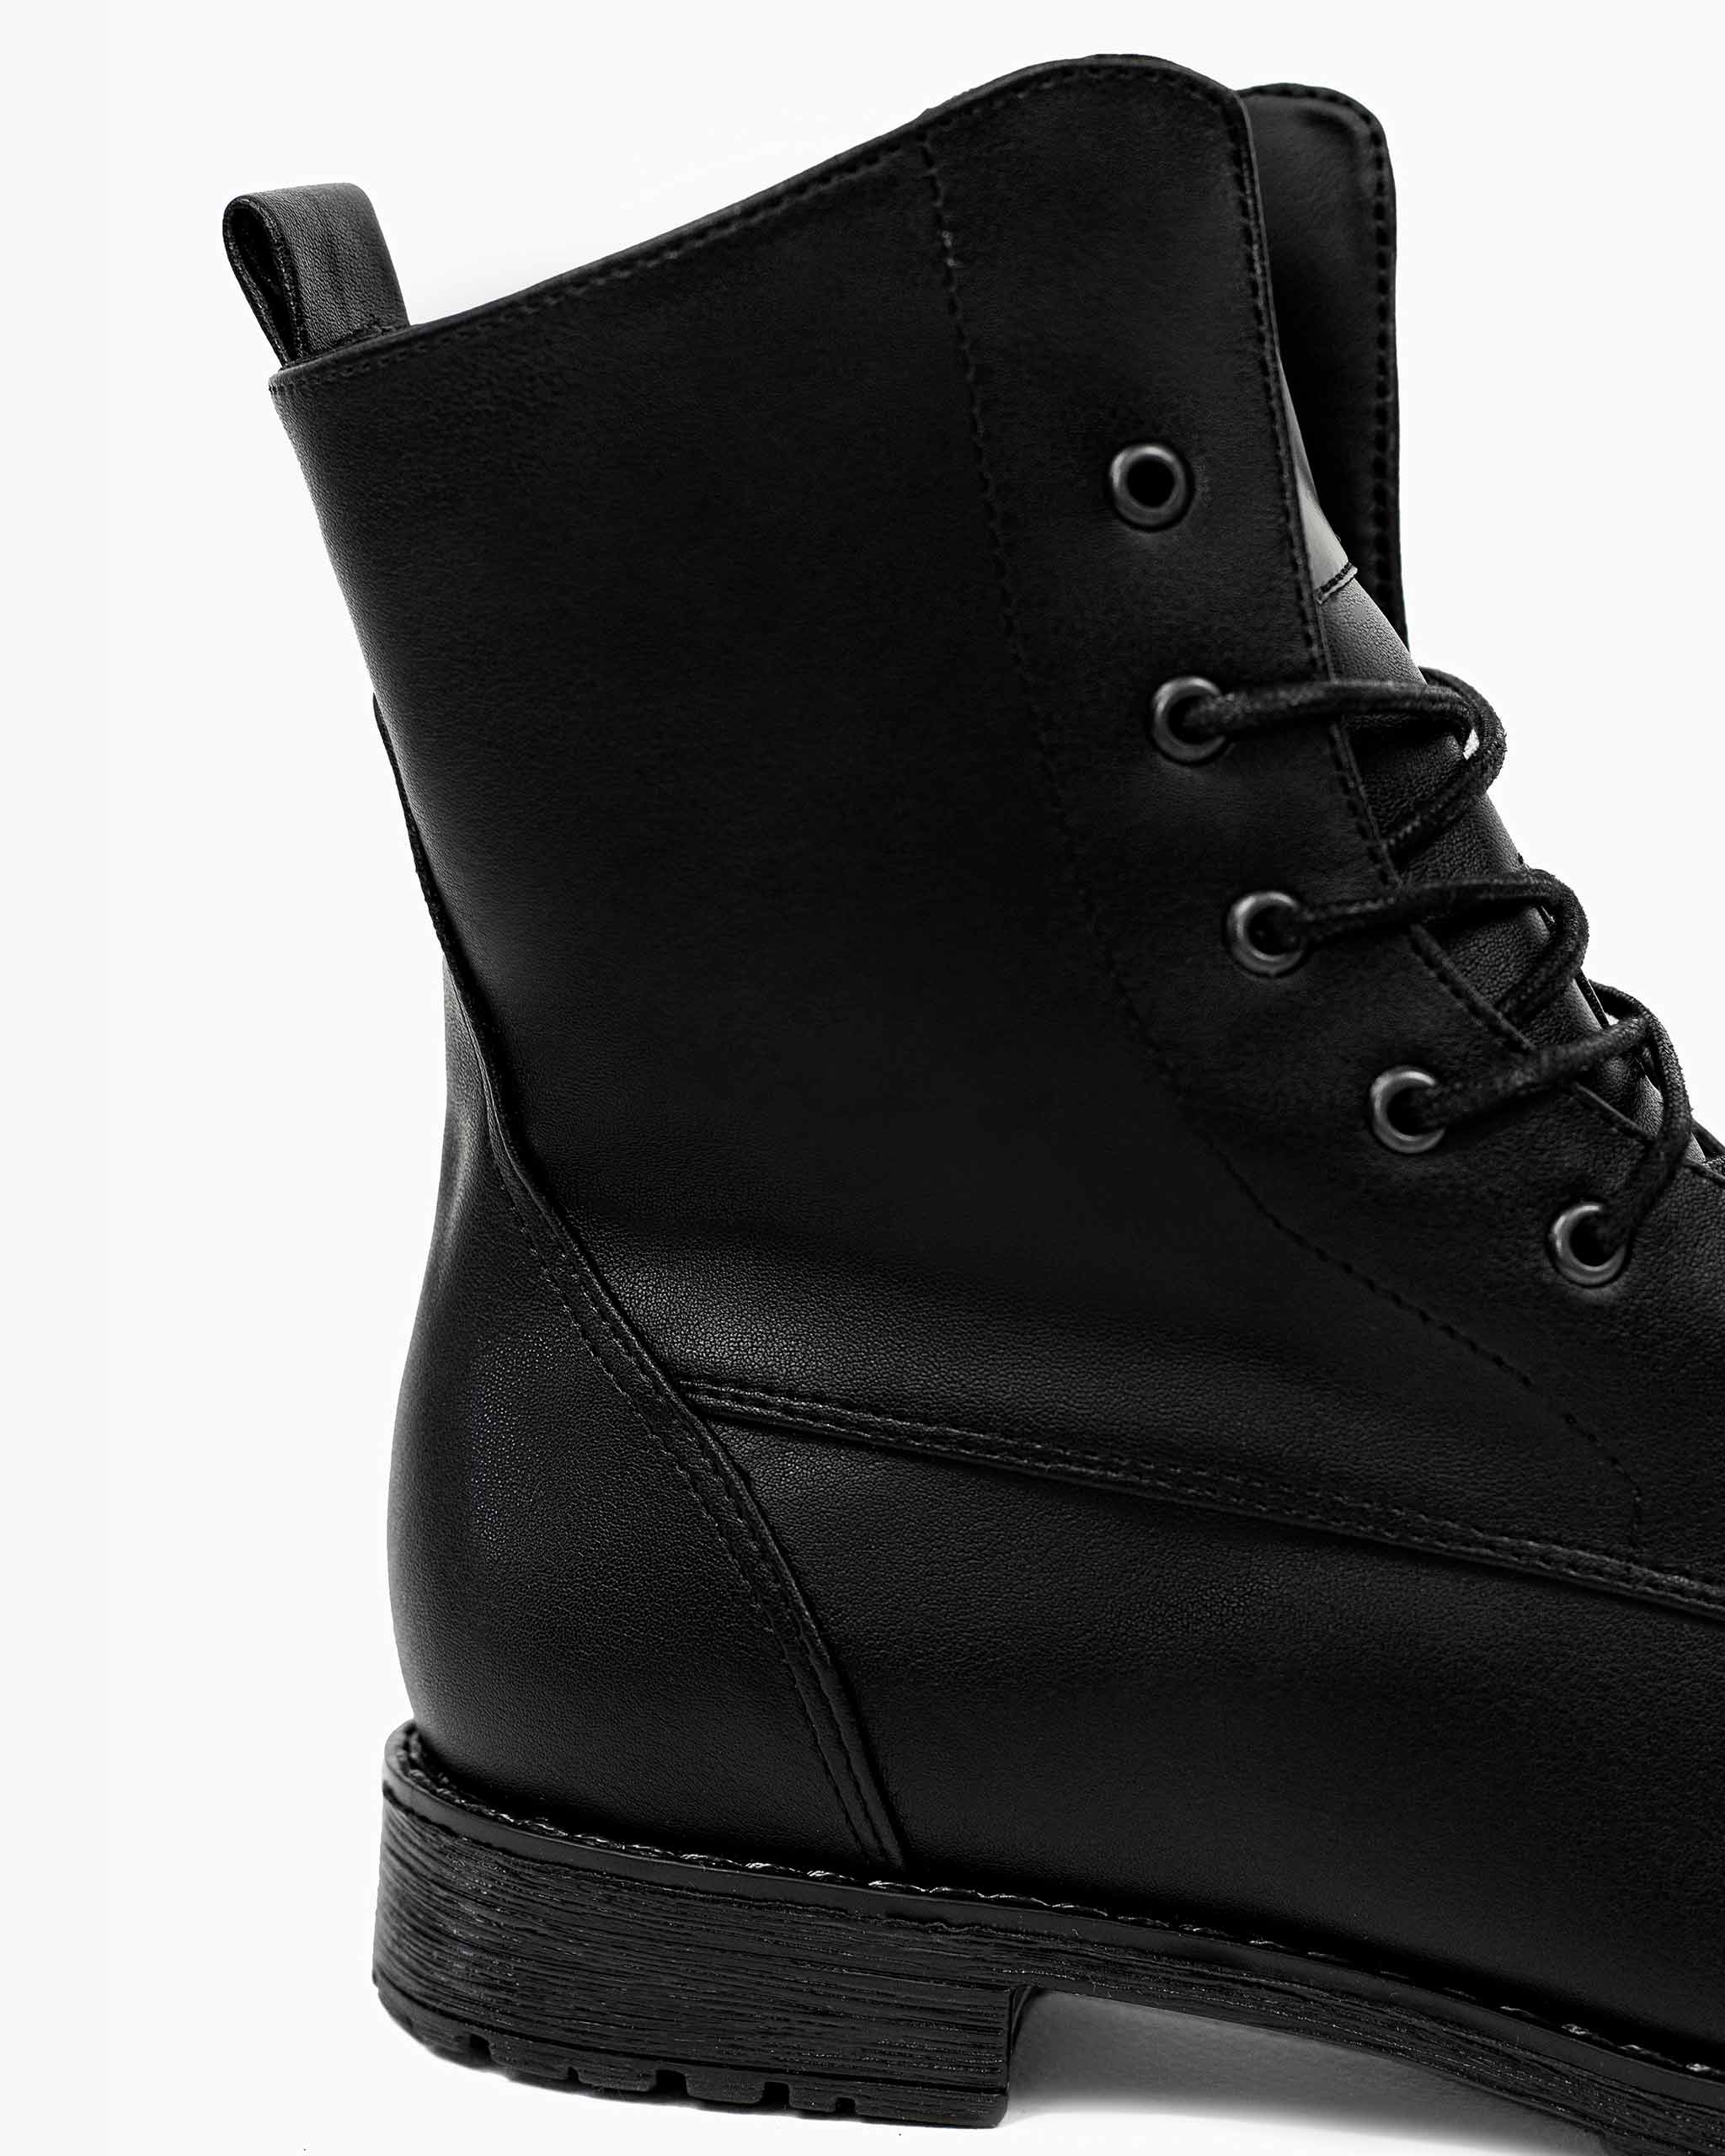 Bohema Workers No. 2 Boots made of Desserto® cactus leather.